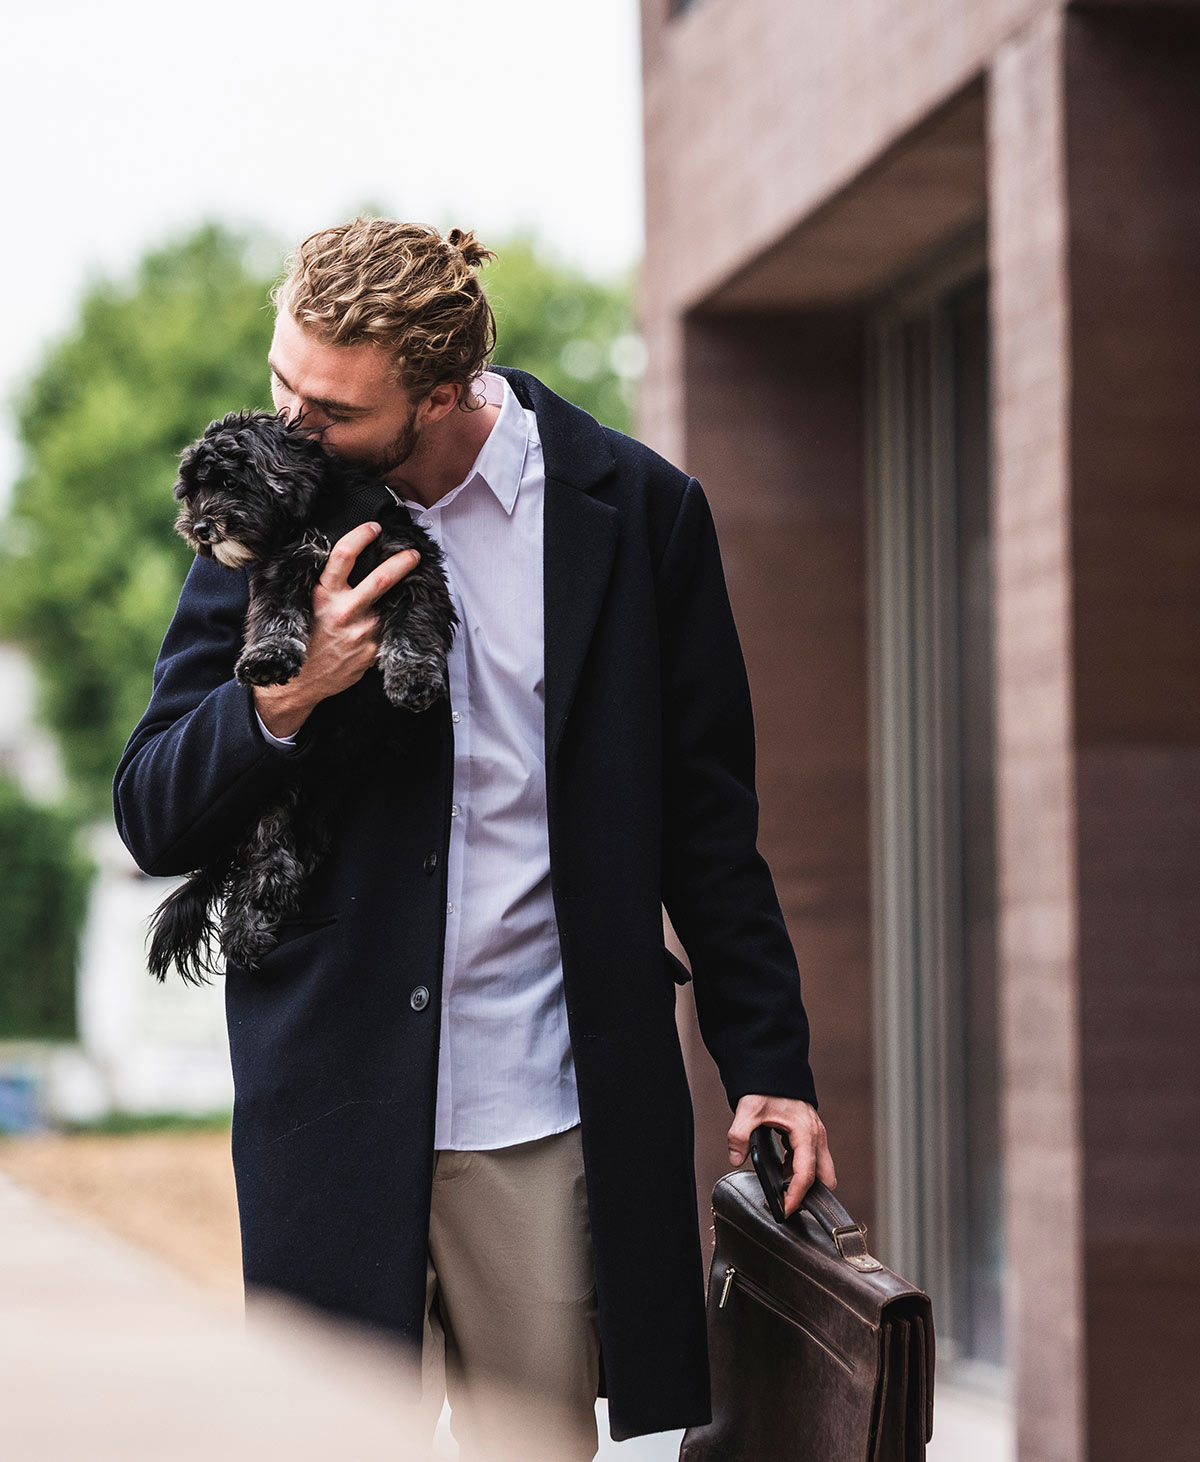 Man with dog in front of commercial building